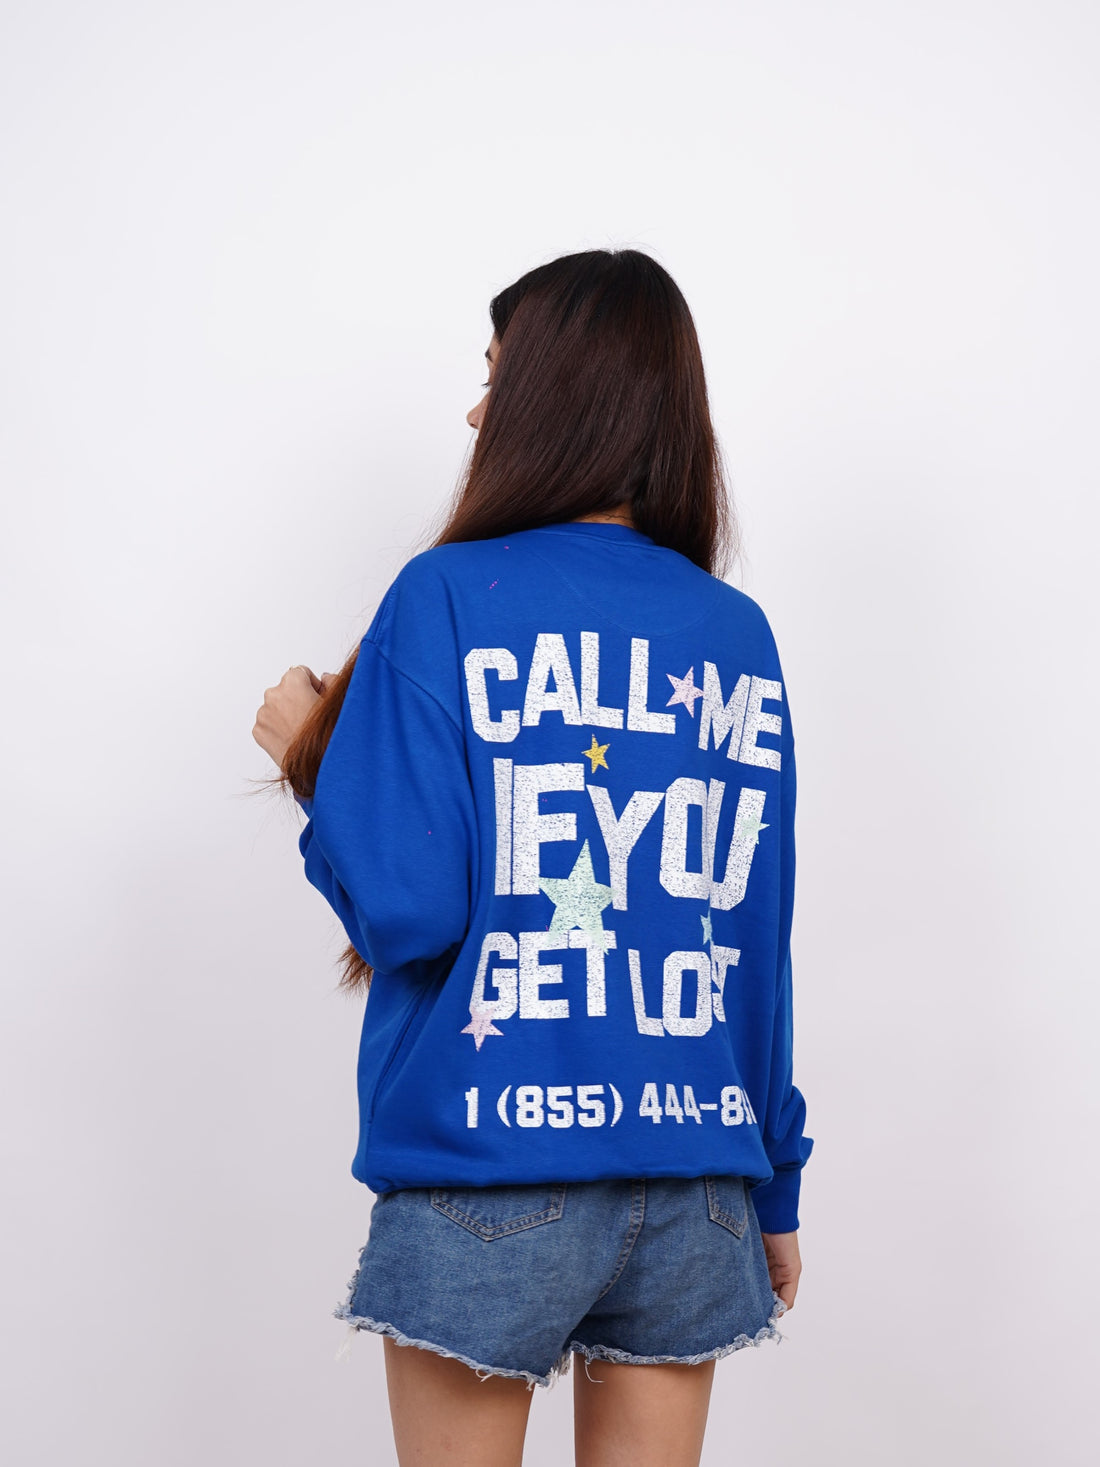 Call Me If You Get Lost - Tyler the Creator Heavyweight Baggy  Sweatshirt For Men And Women